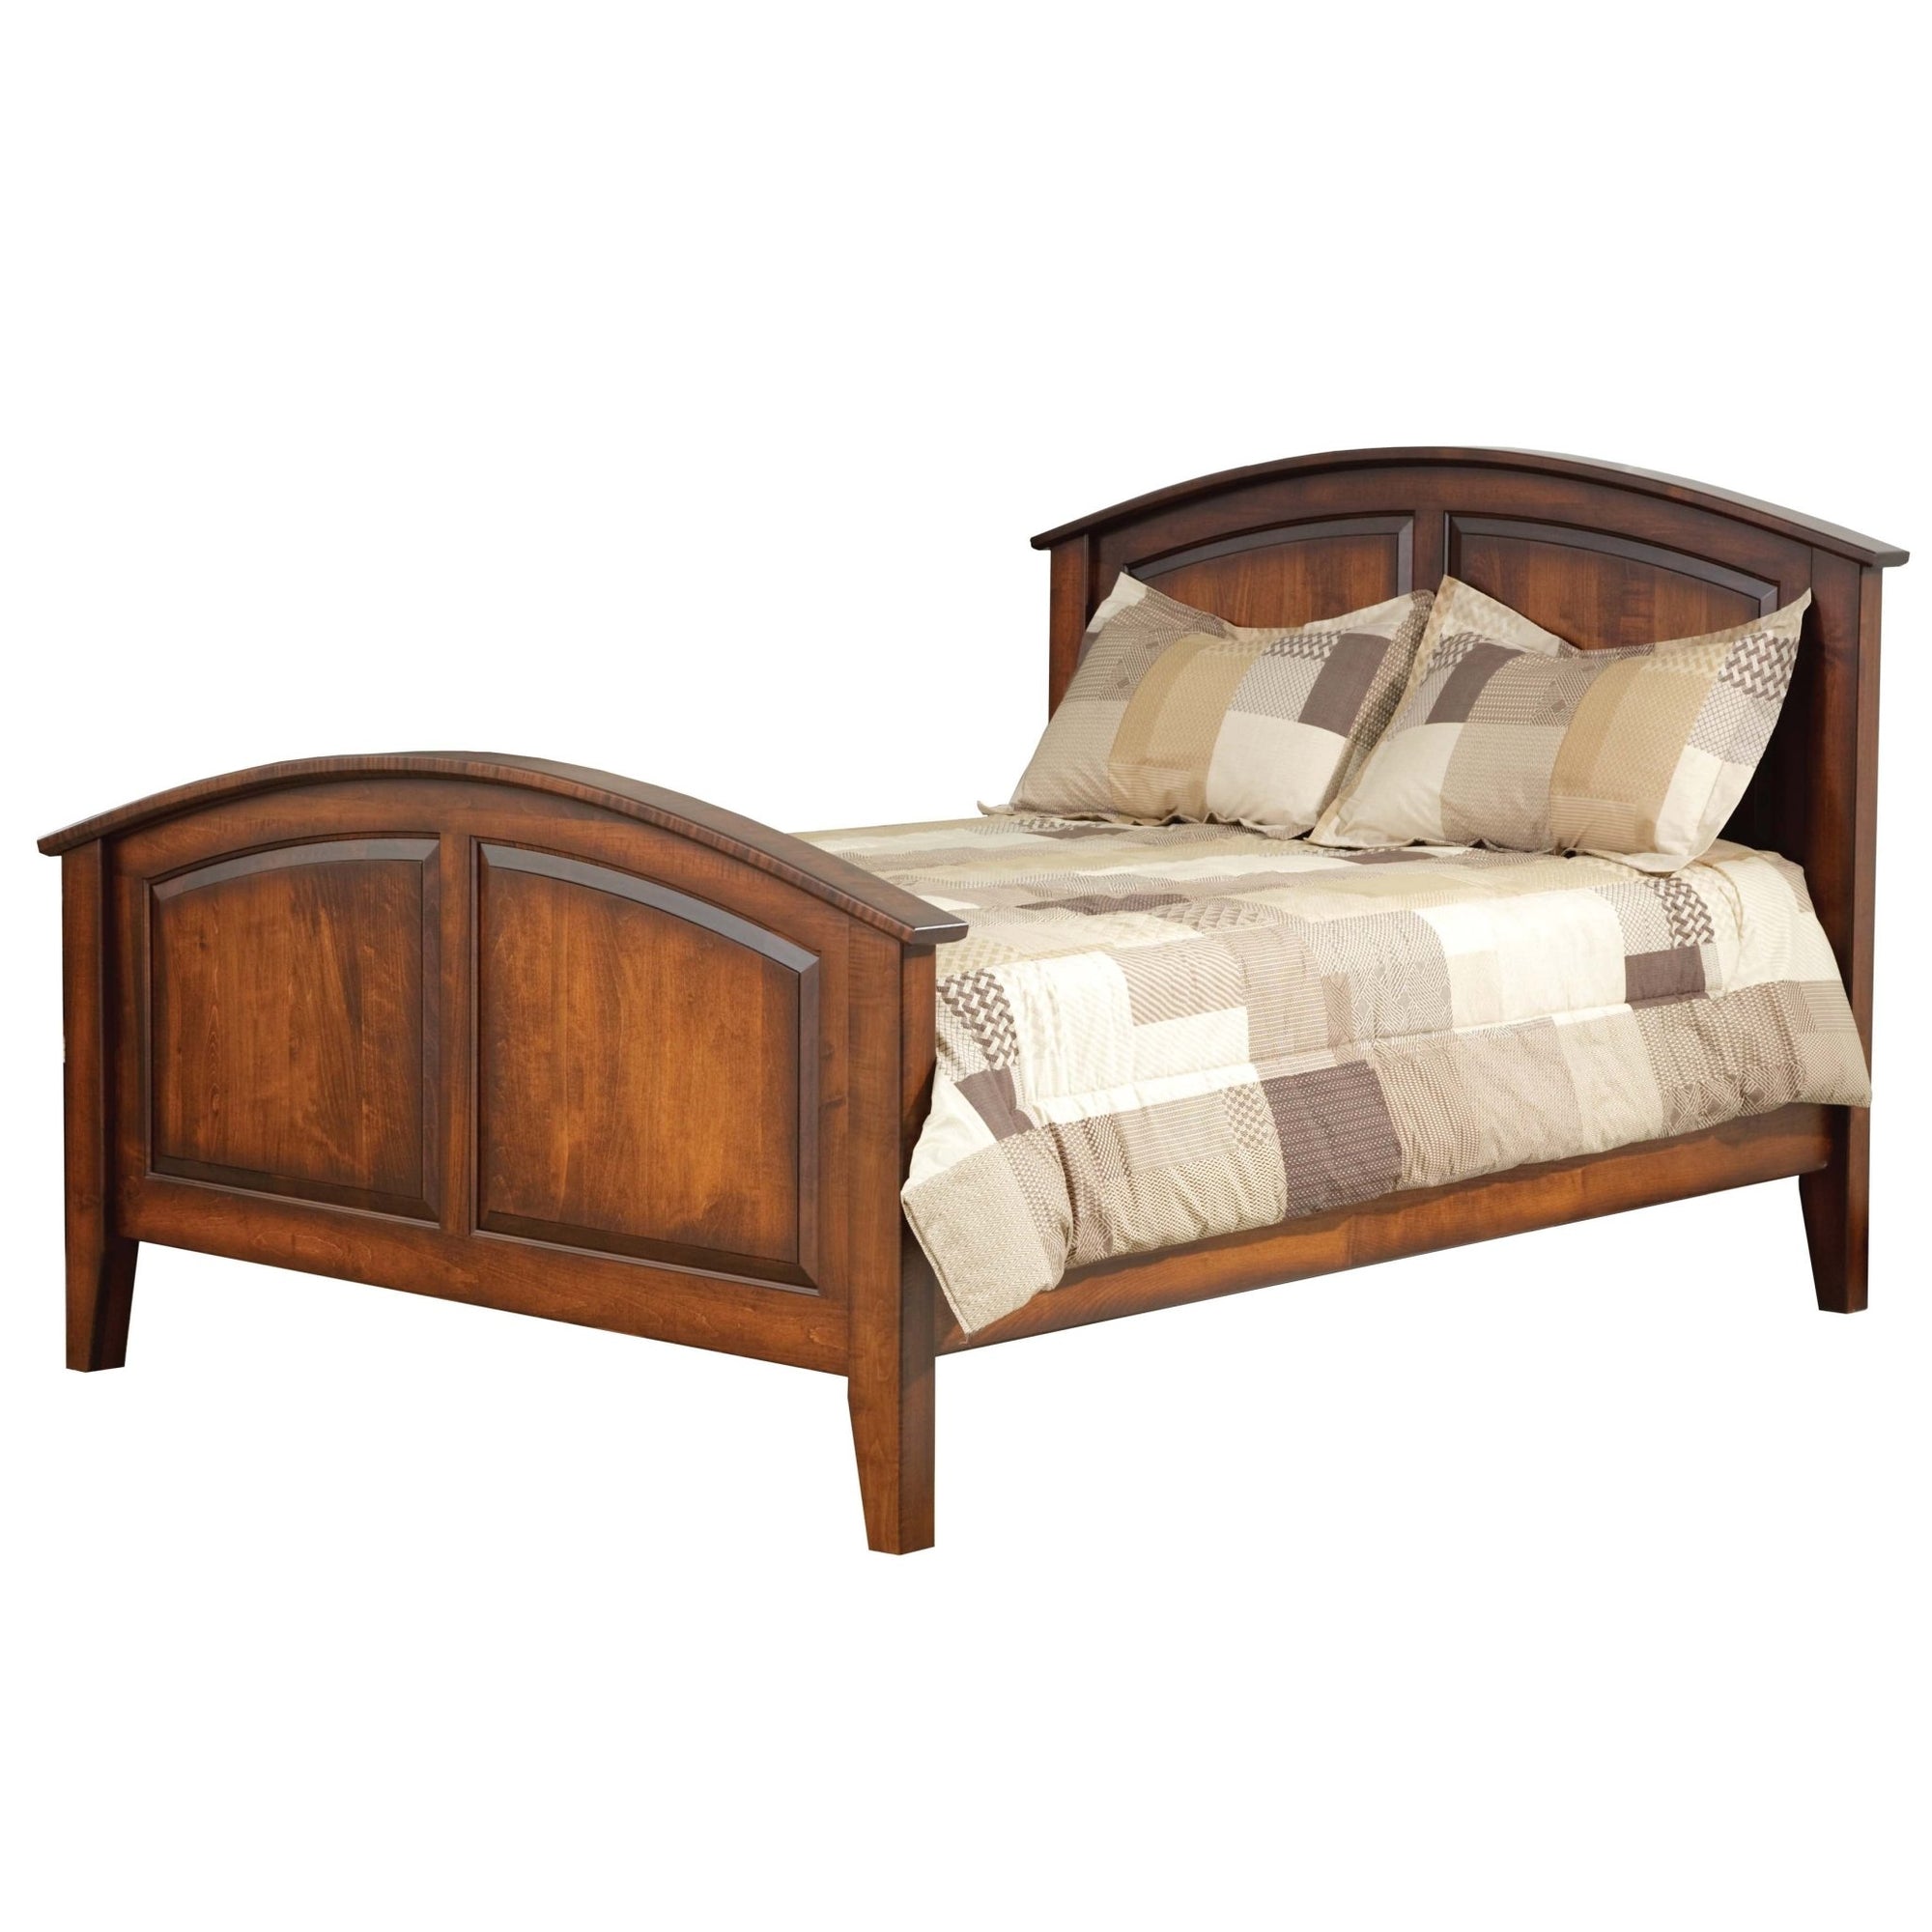 Morning Ridge Bed - snyders.furniture